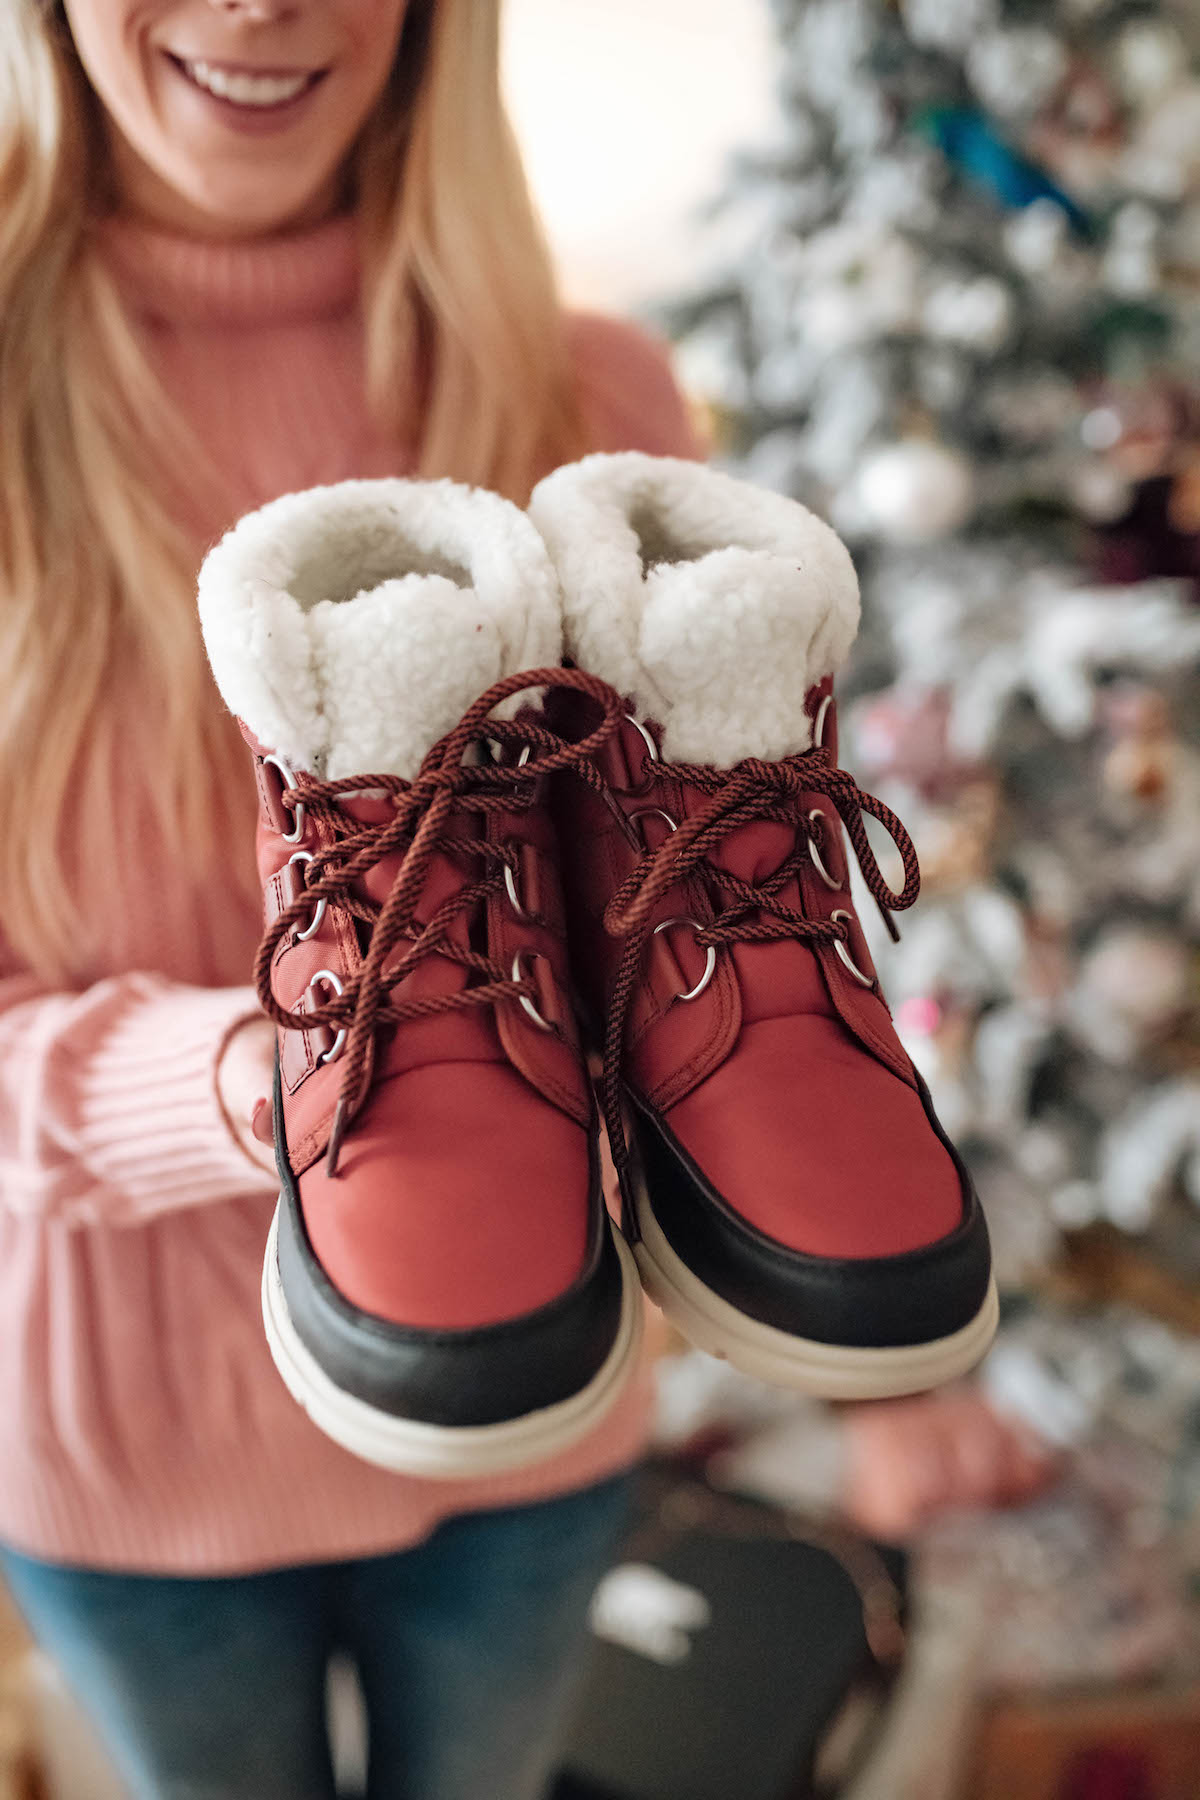 Zappos Holiday Gift Guide